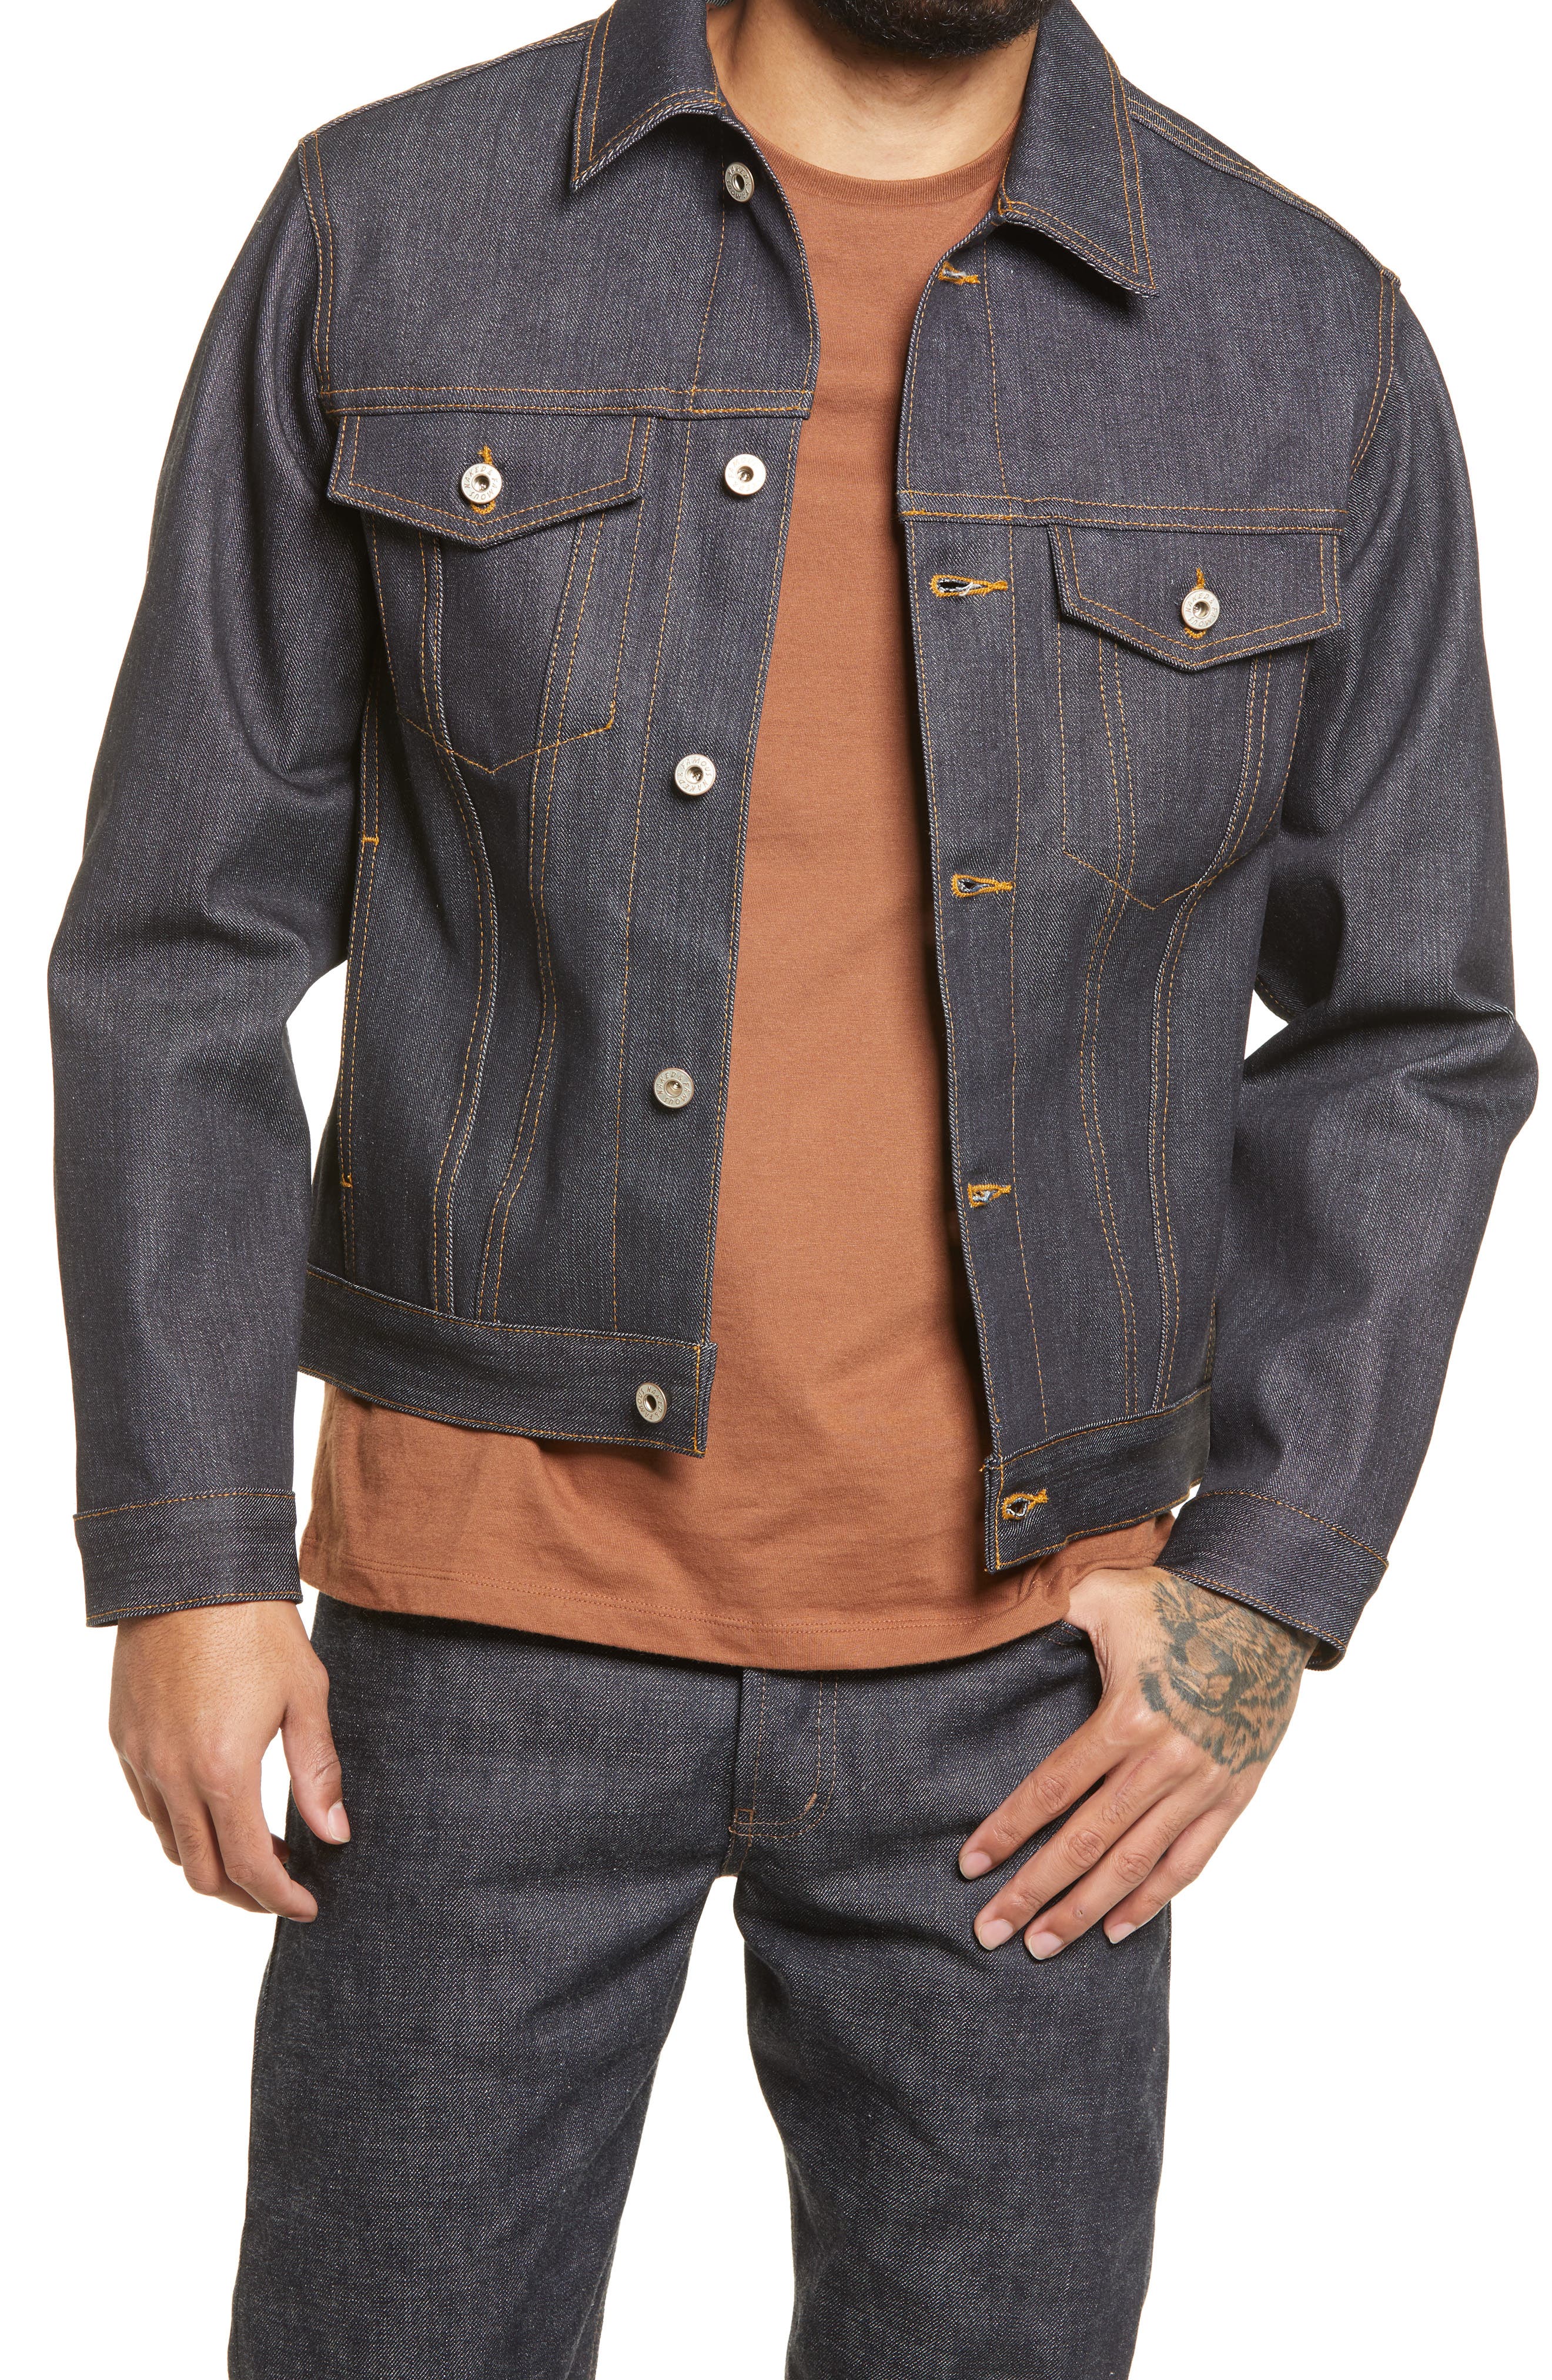 naked and famous jacket